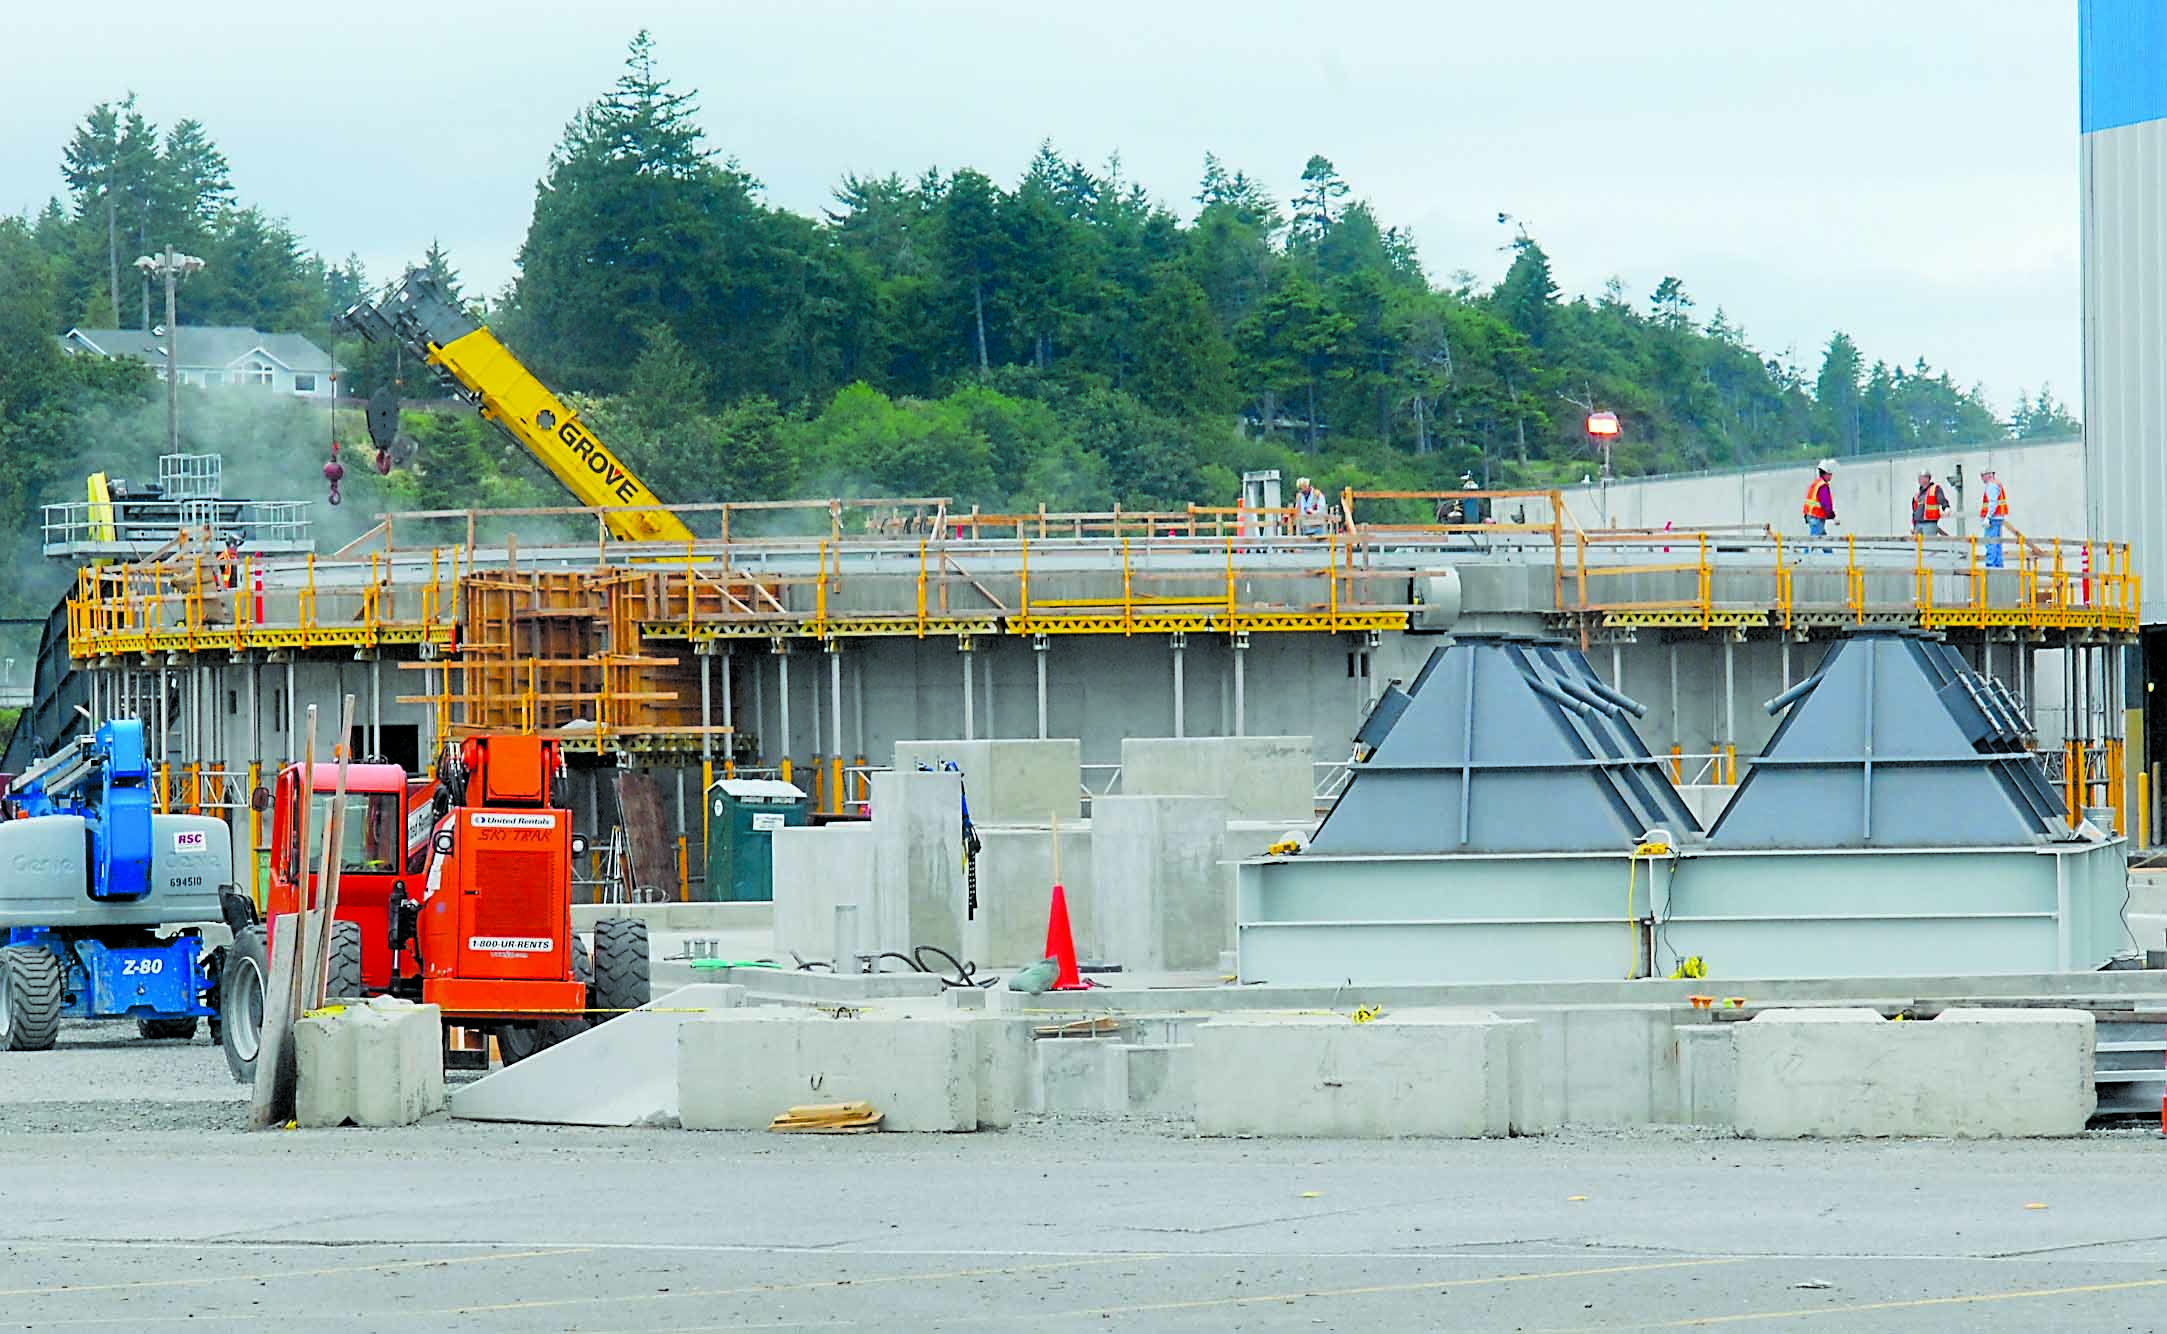 Construction of the biomass-fueled cogeneration plant at Nippon Paper Industries USA in Port Angeles continued Monday.  -- Photo by Keith Thorpe/Peninsula Daily News